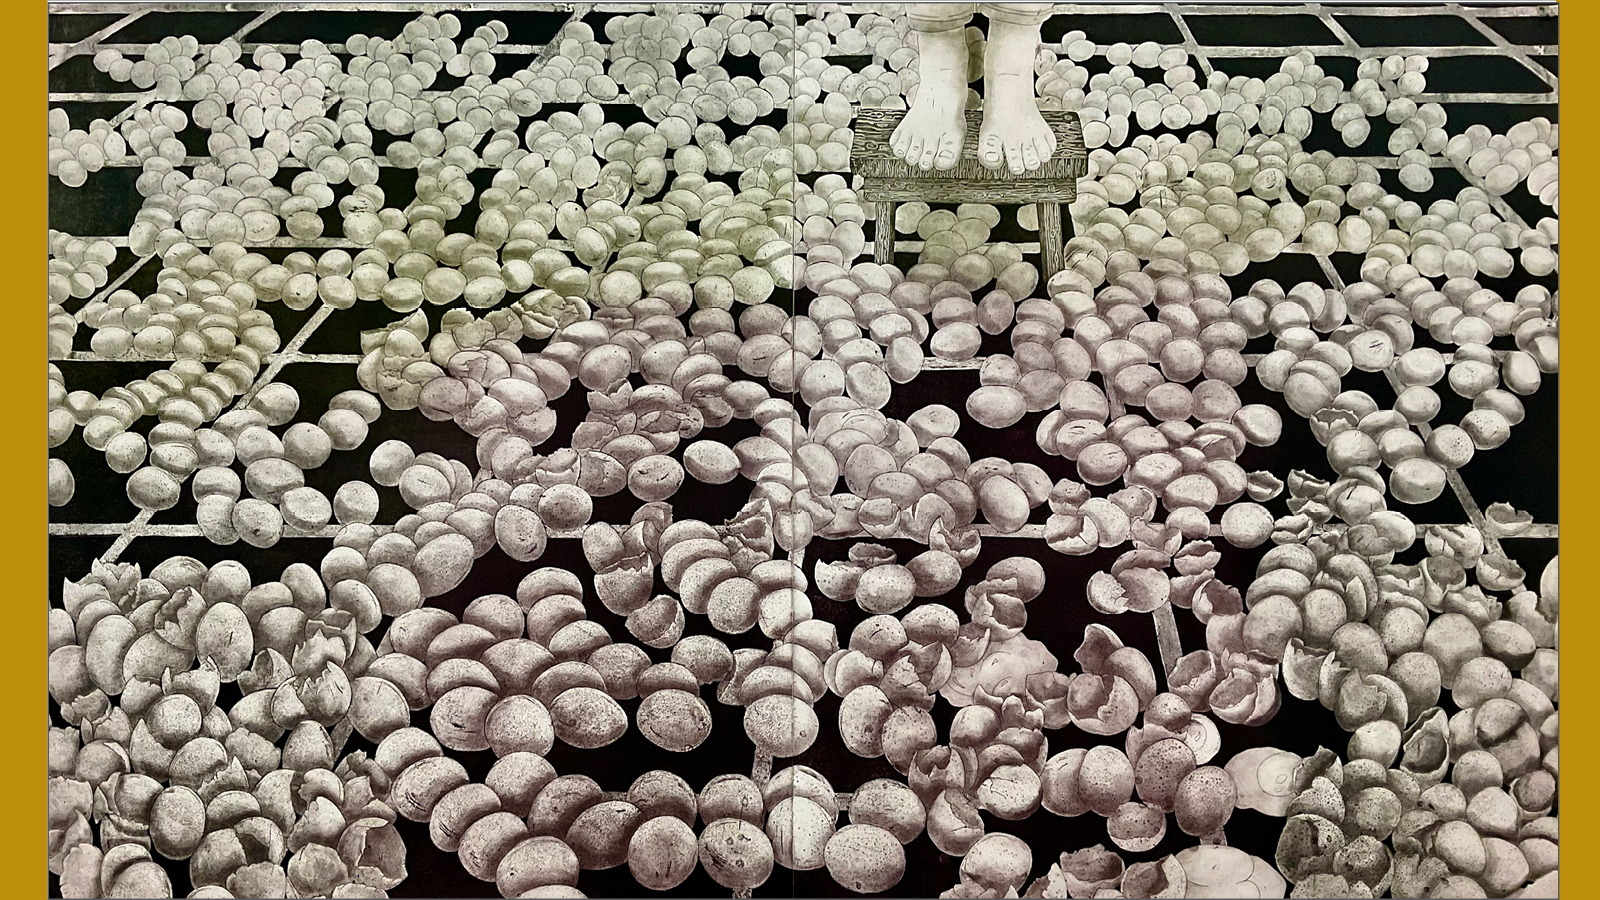 Emily Legleitner: You are full of want and fear. An illustration of several thousand eggs spread across a black tile floor. The feet of a figure can be seen standing on a stool placed in the middle of the eggs. Some eggs have been broken, but most are whole. Colours are muted, shades of dark reg-greys and yellow-greys make up the eggs, in stark contrast to jet black tile flooring.